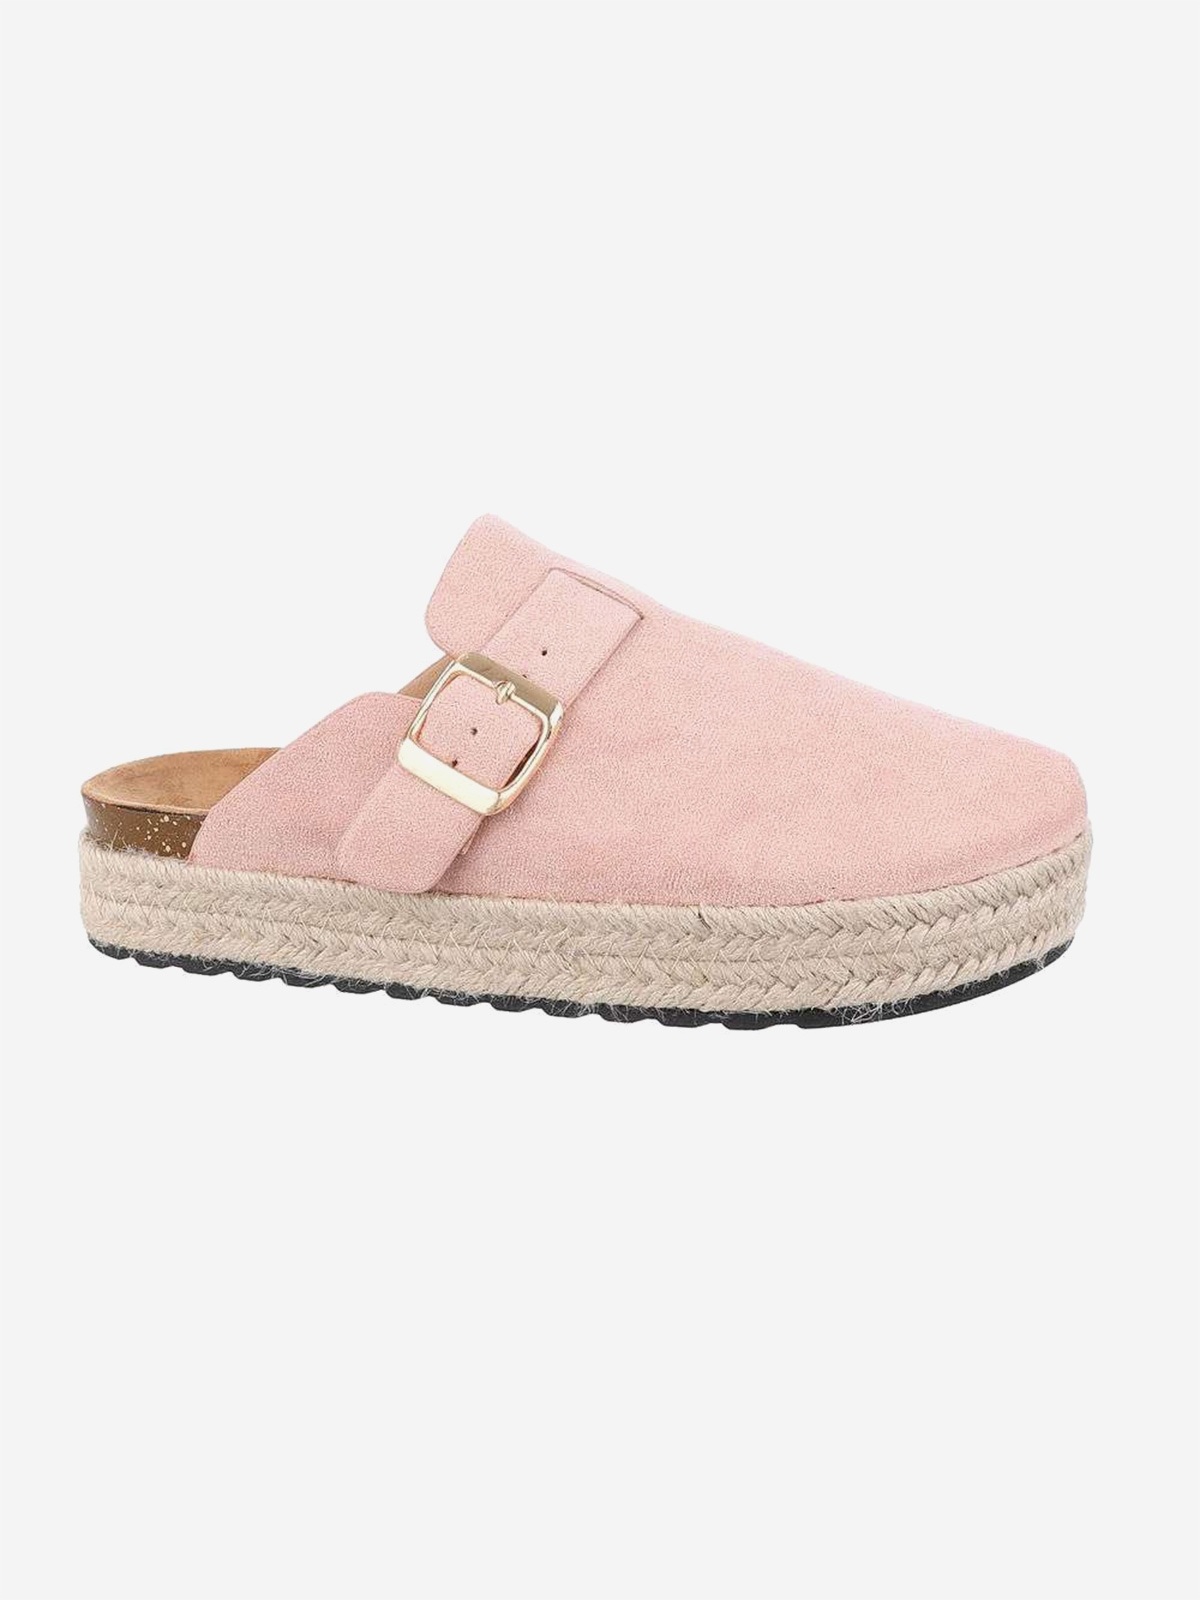 Women's slippers with a thick sole in pink